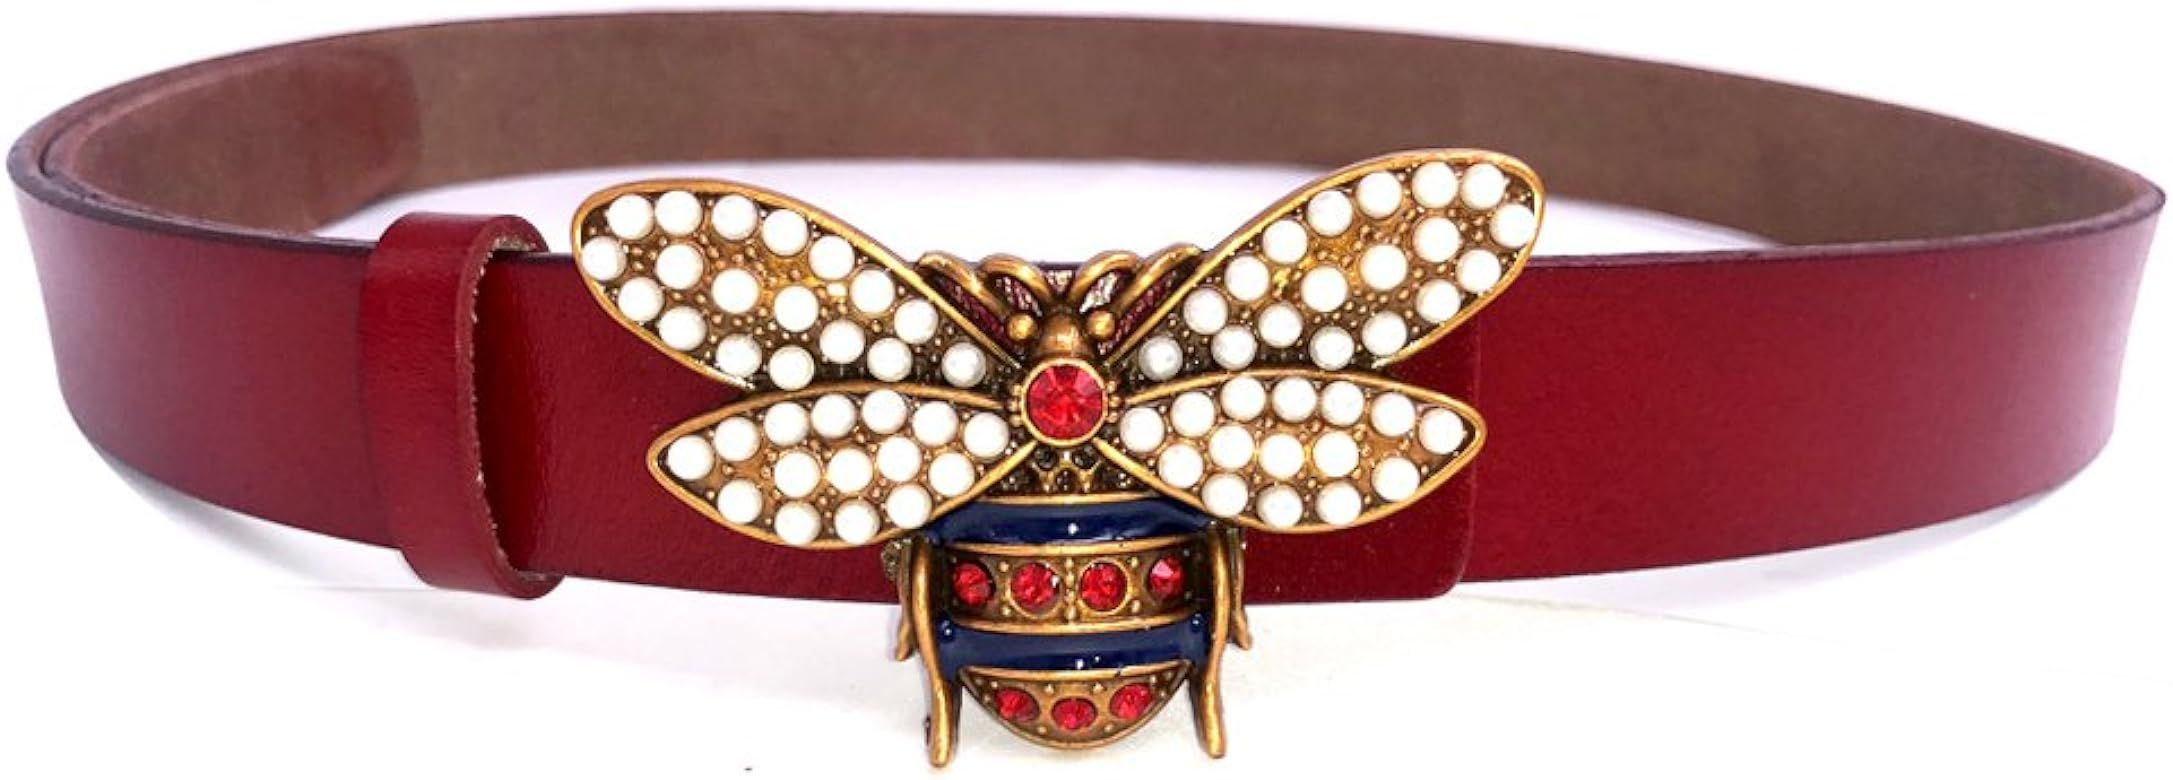 Women 1.10″ Thin Genuine Leather Fashion Bee Designer Buckle Belt With Pearl | Amazon (US)